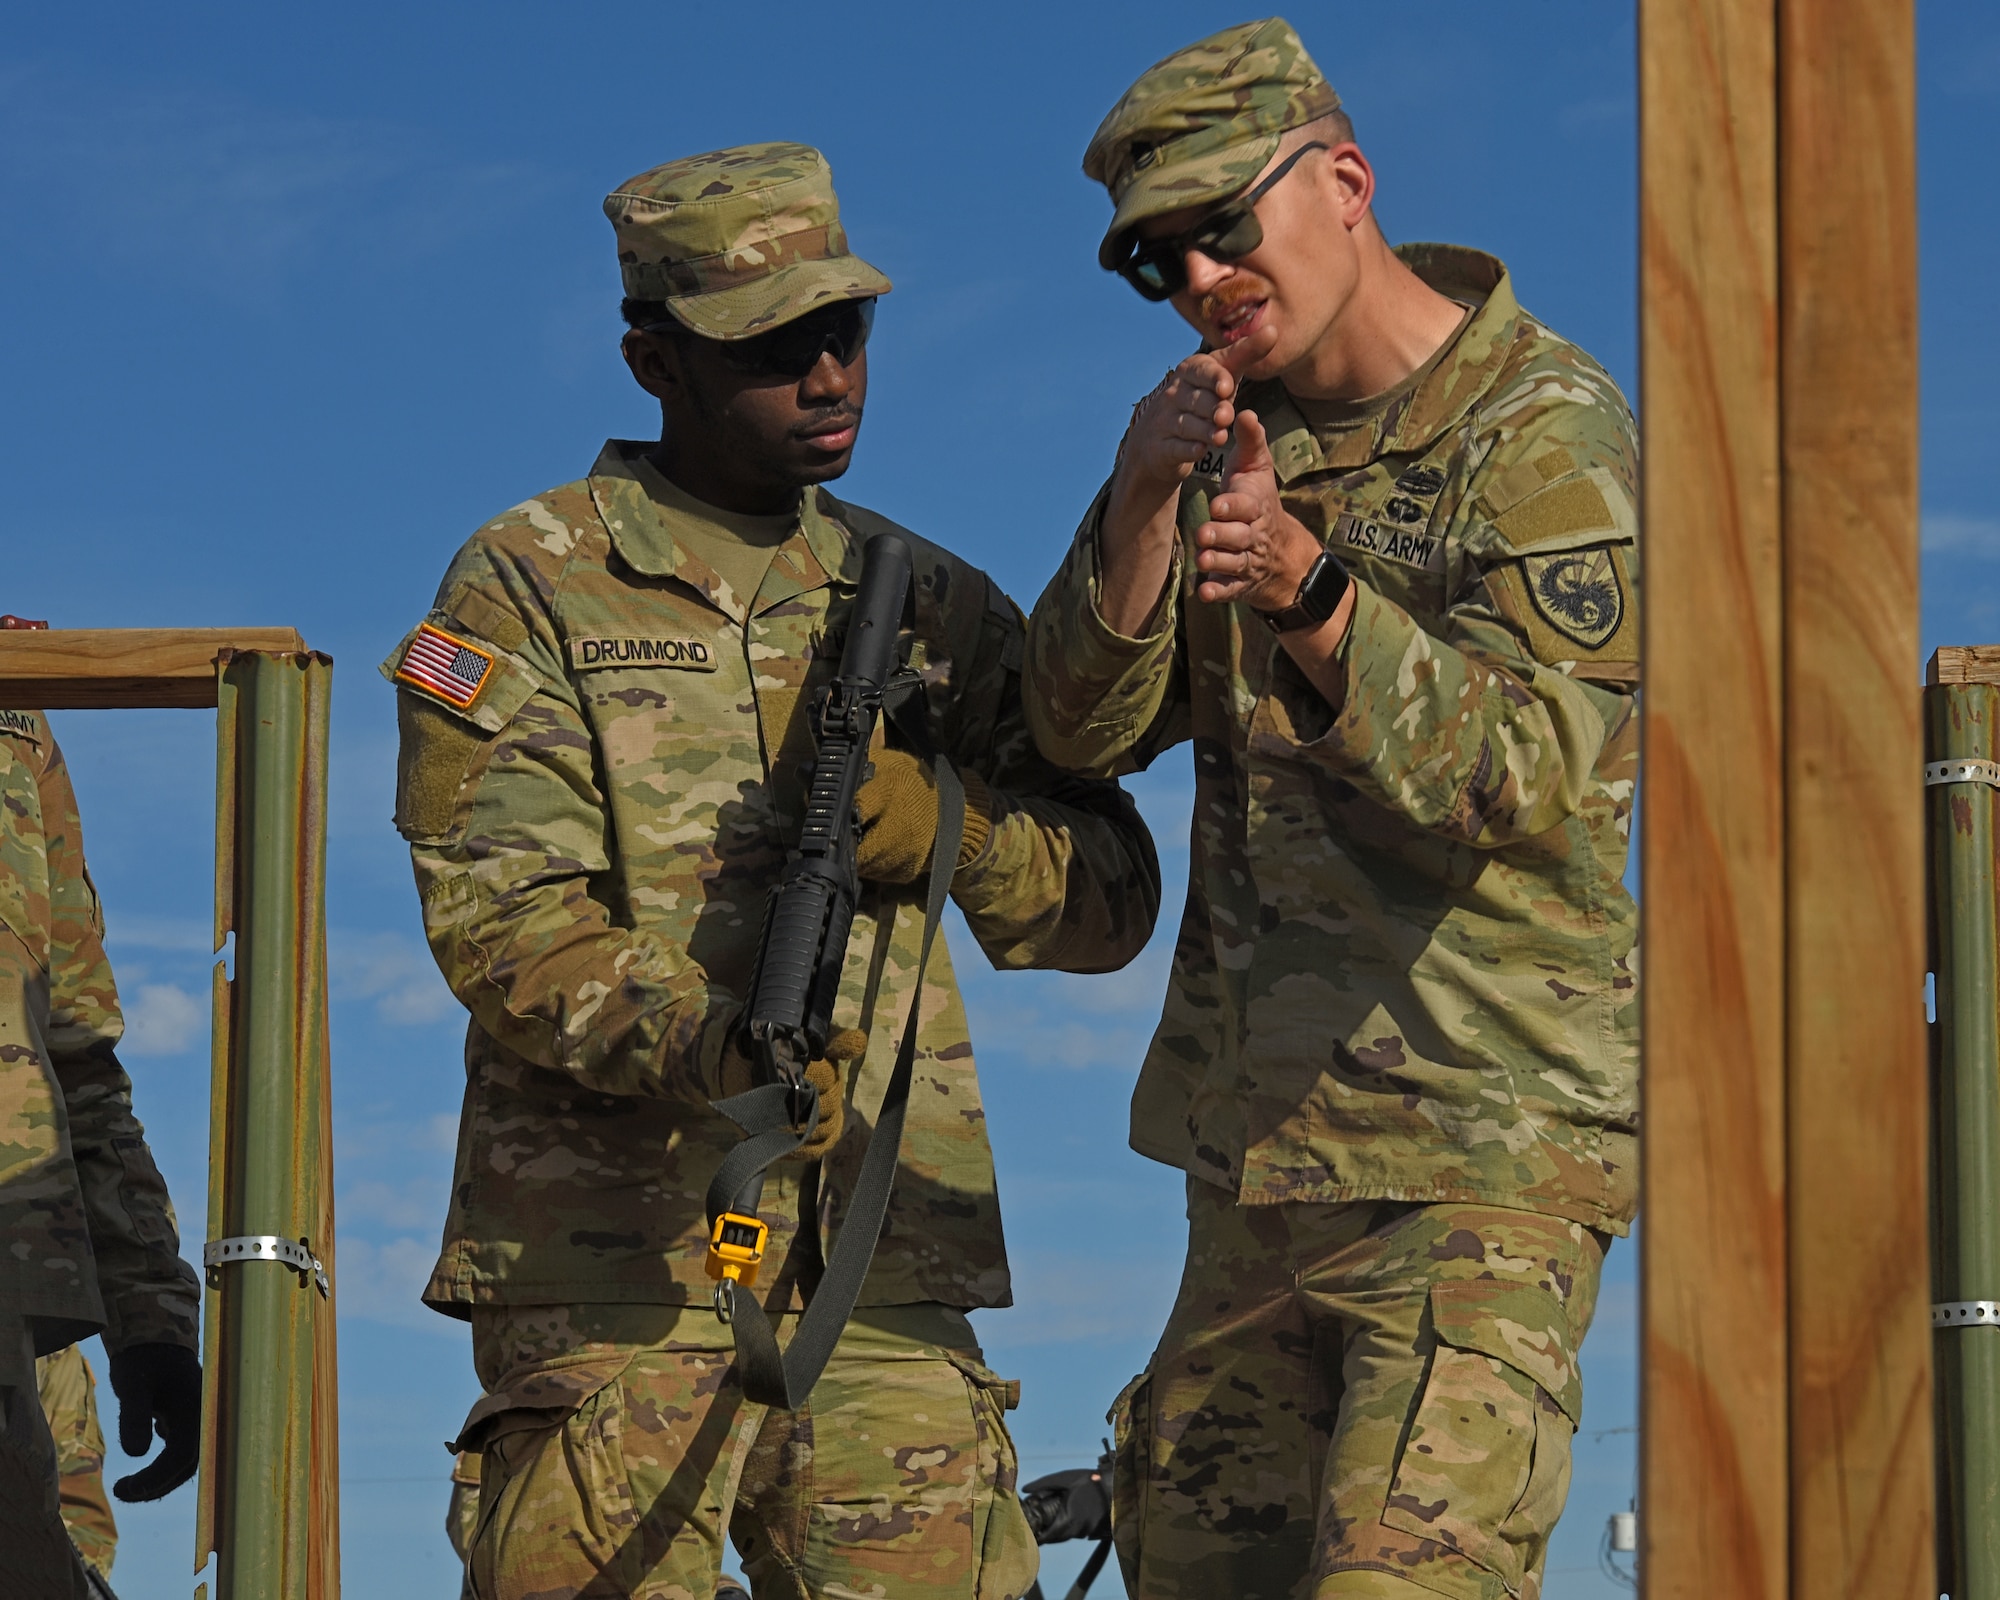 U.S. Army Sgt. First Class Ryan Slabaugh, 344th Military Intelligence Battalion instructor, explains room clearing strategy to Pvt. Joshua Drummond, during the joint capstone assessment at Goodfellow Air Force Base, Texas, Feb. 1, 2022. The 17th Training Wings ensures joint service military members develop and hone their skills by utilizing realistic hands-on training tactics. (U.S. Air Force Photo by Senior Airman Abbey Rieves)